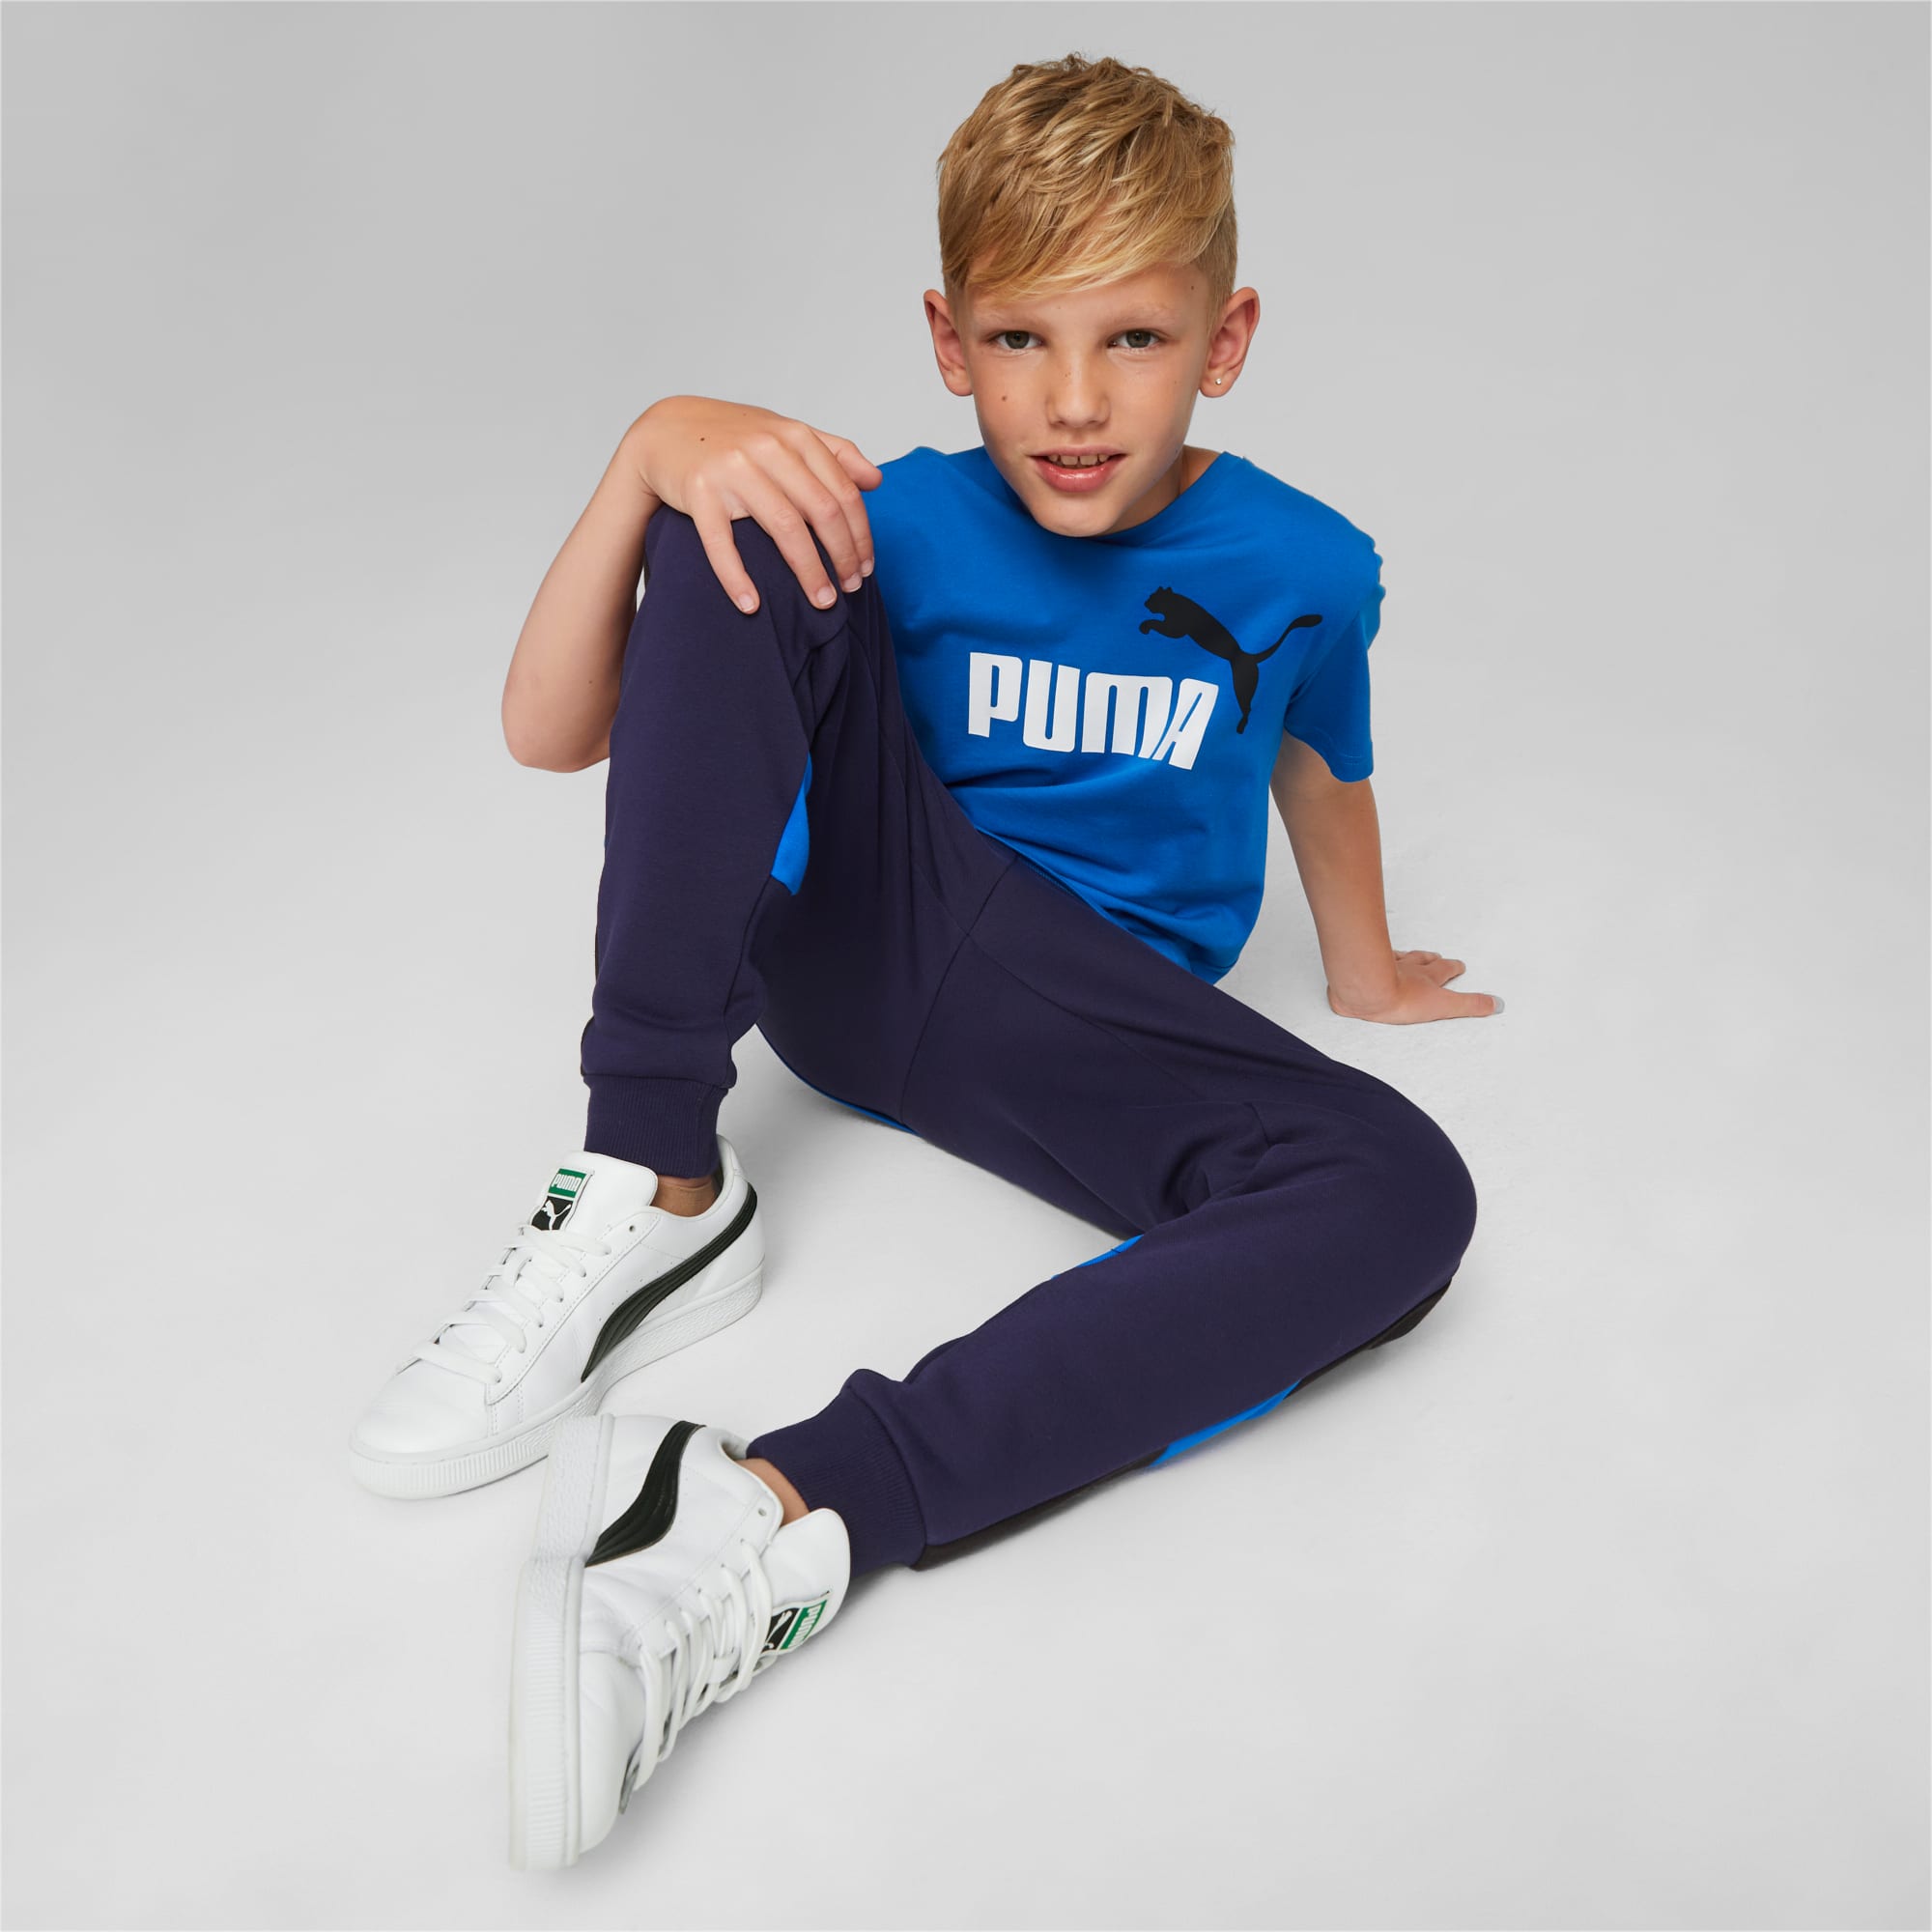 PUMA Essentials+ Two-Tone Logo Youth T-Shirt, Racing Blue, Size 92, Clothing